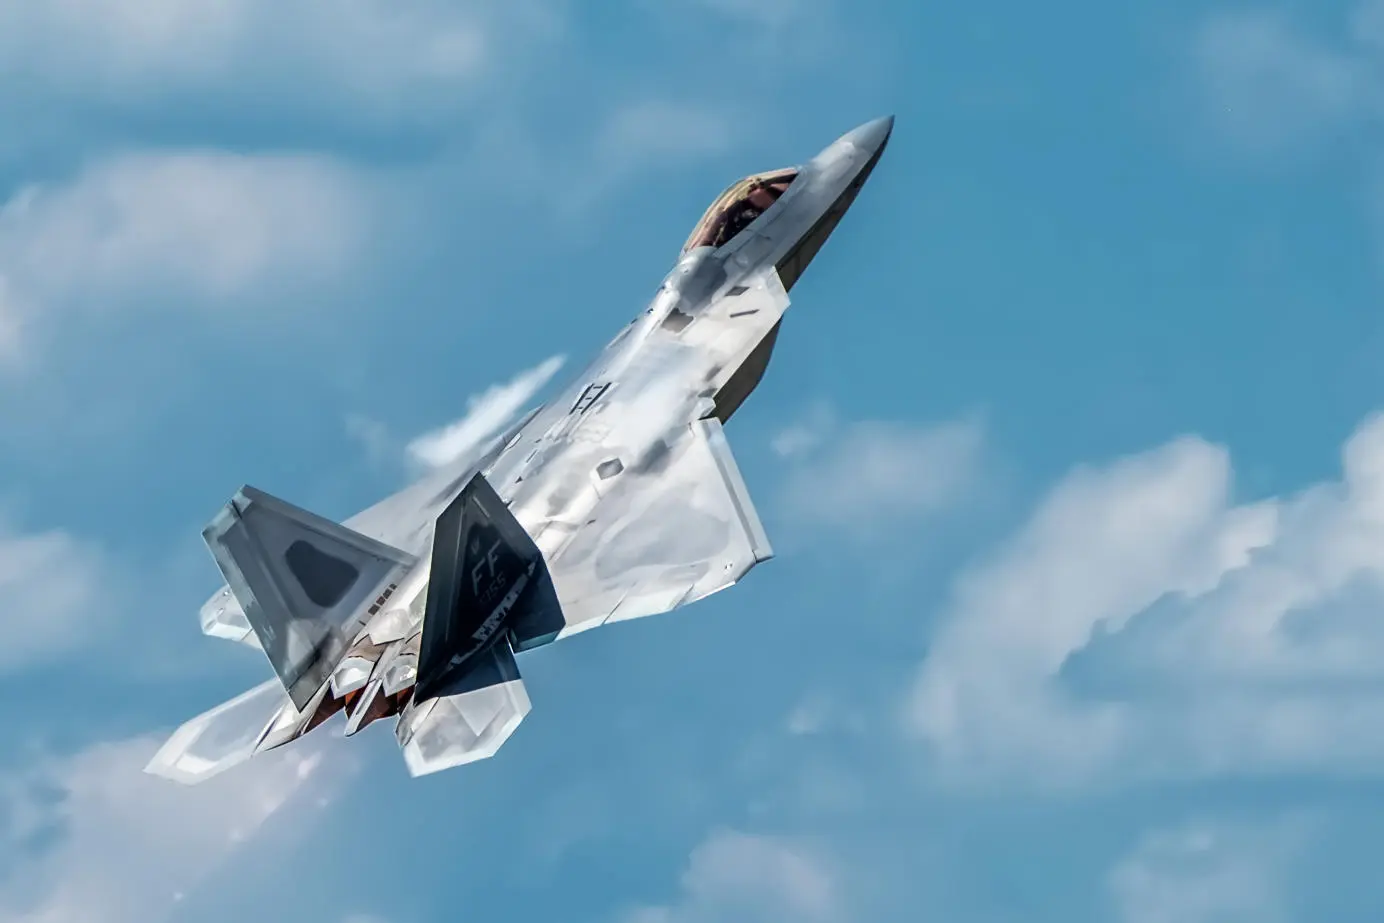 The F-22 Raptor is named after a bird of prey